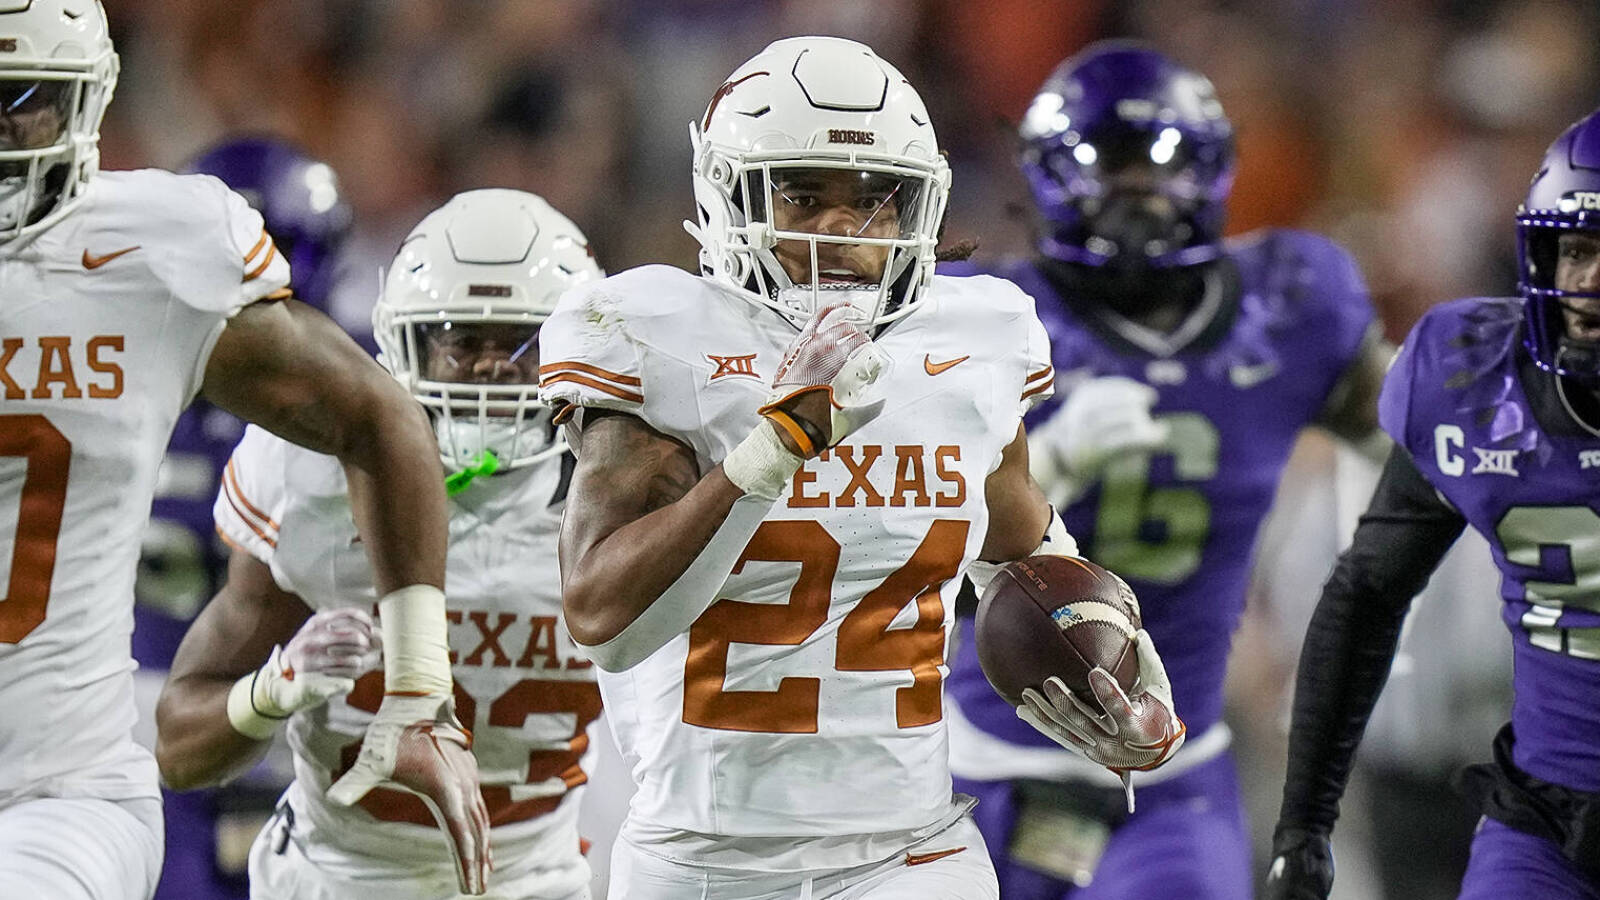 Texas RB seems poised to land with Cowboys